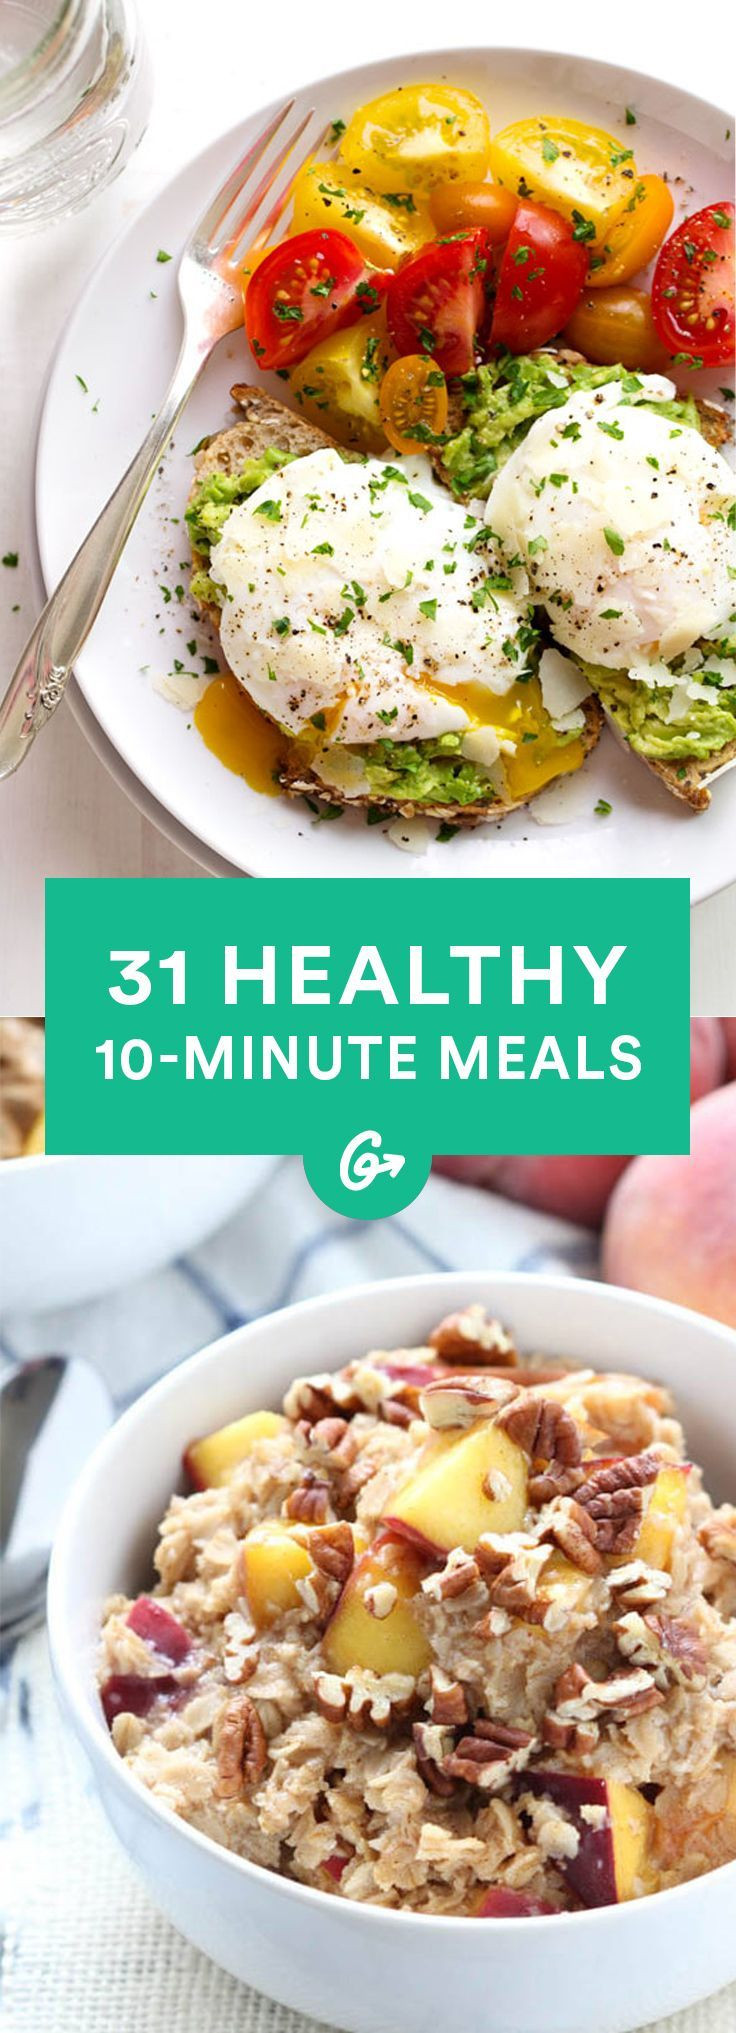 Healthy Salty Snacks For Weight Loss
 31 Healthy Meals You Can Make in 10 Minutes or Less